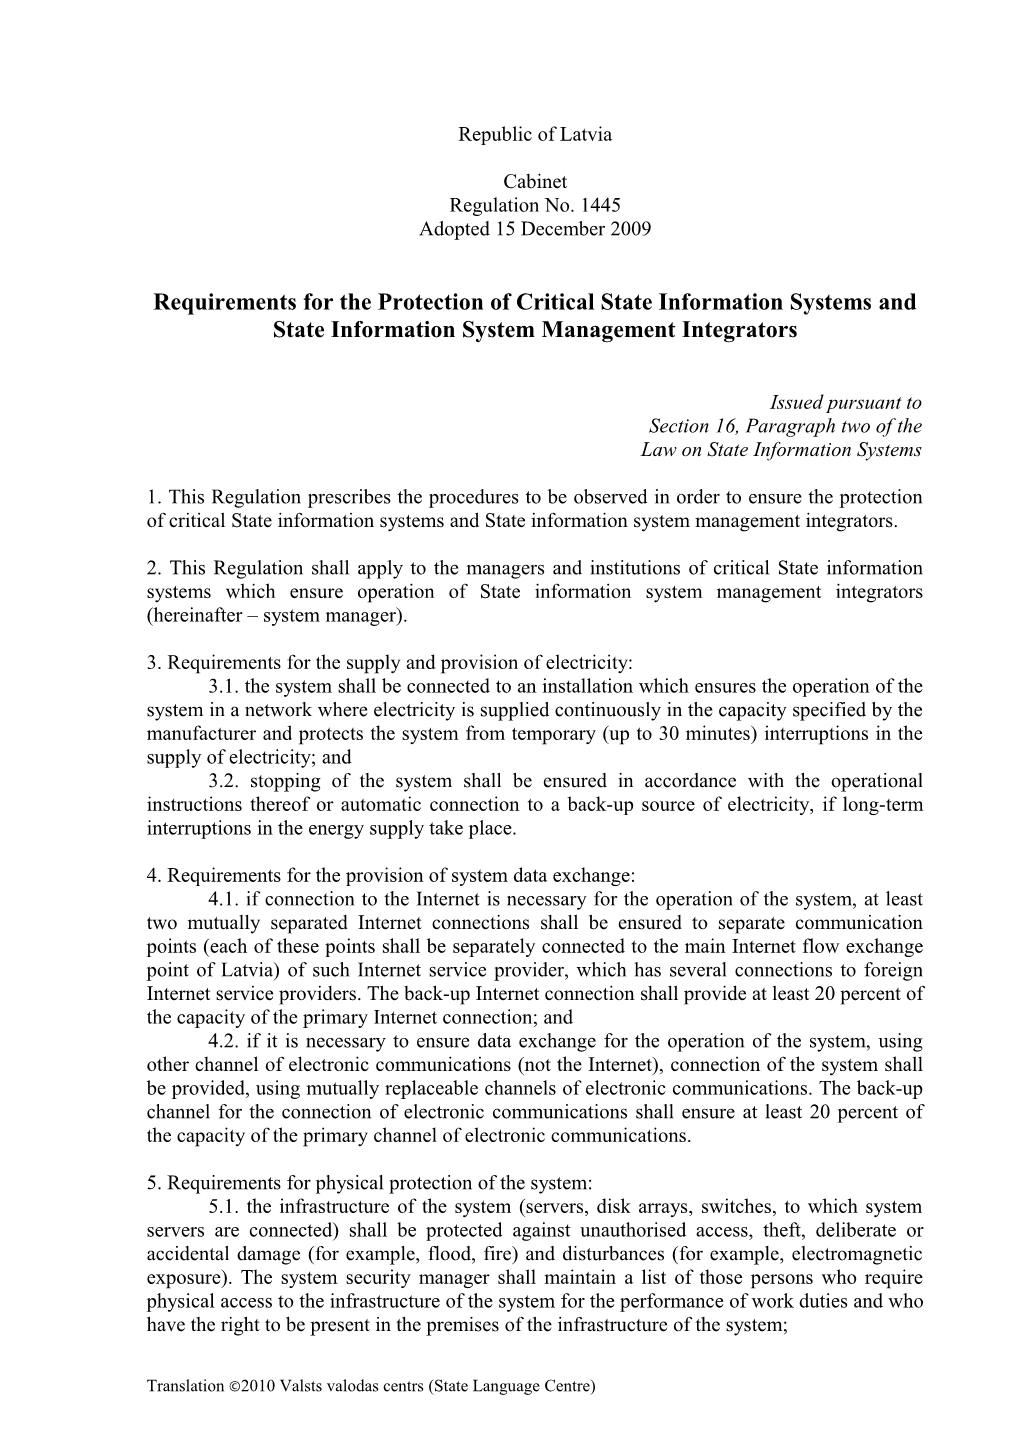 Requirements for the Protection of Critical State Information Systems and State Information